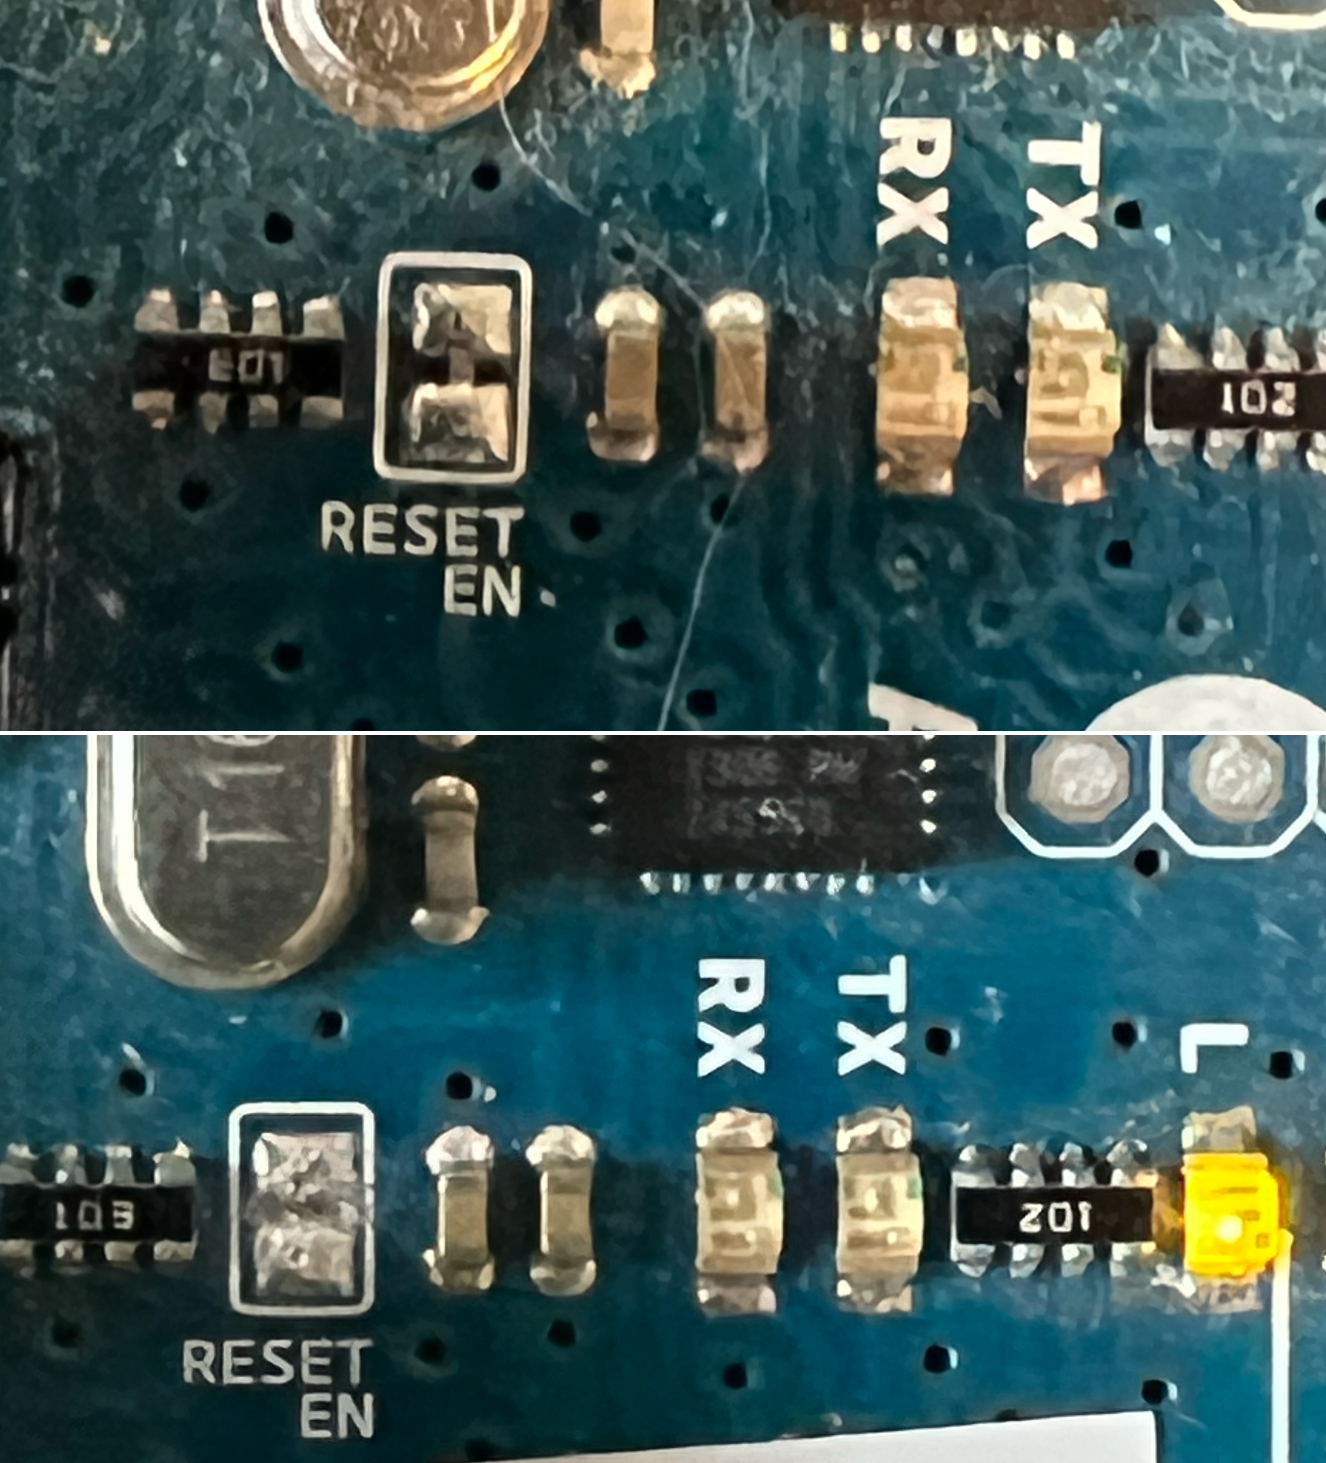 Cut the trace on RESET EN to disconnect Reset